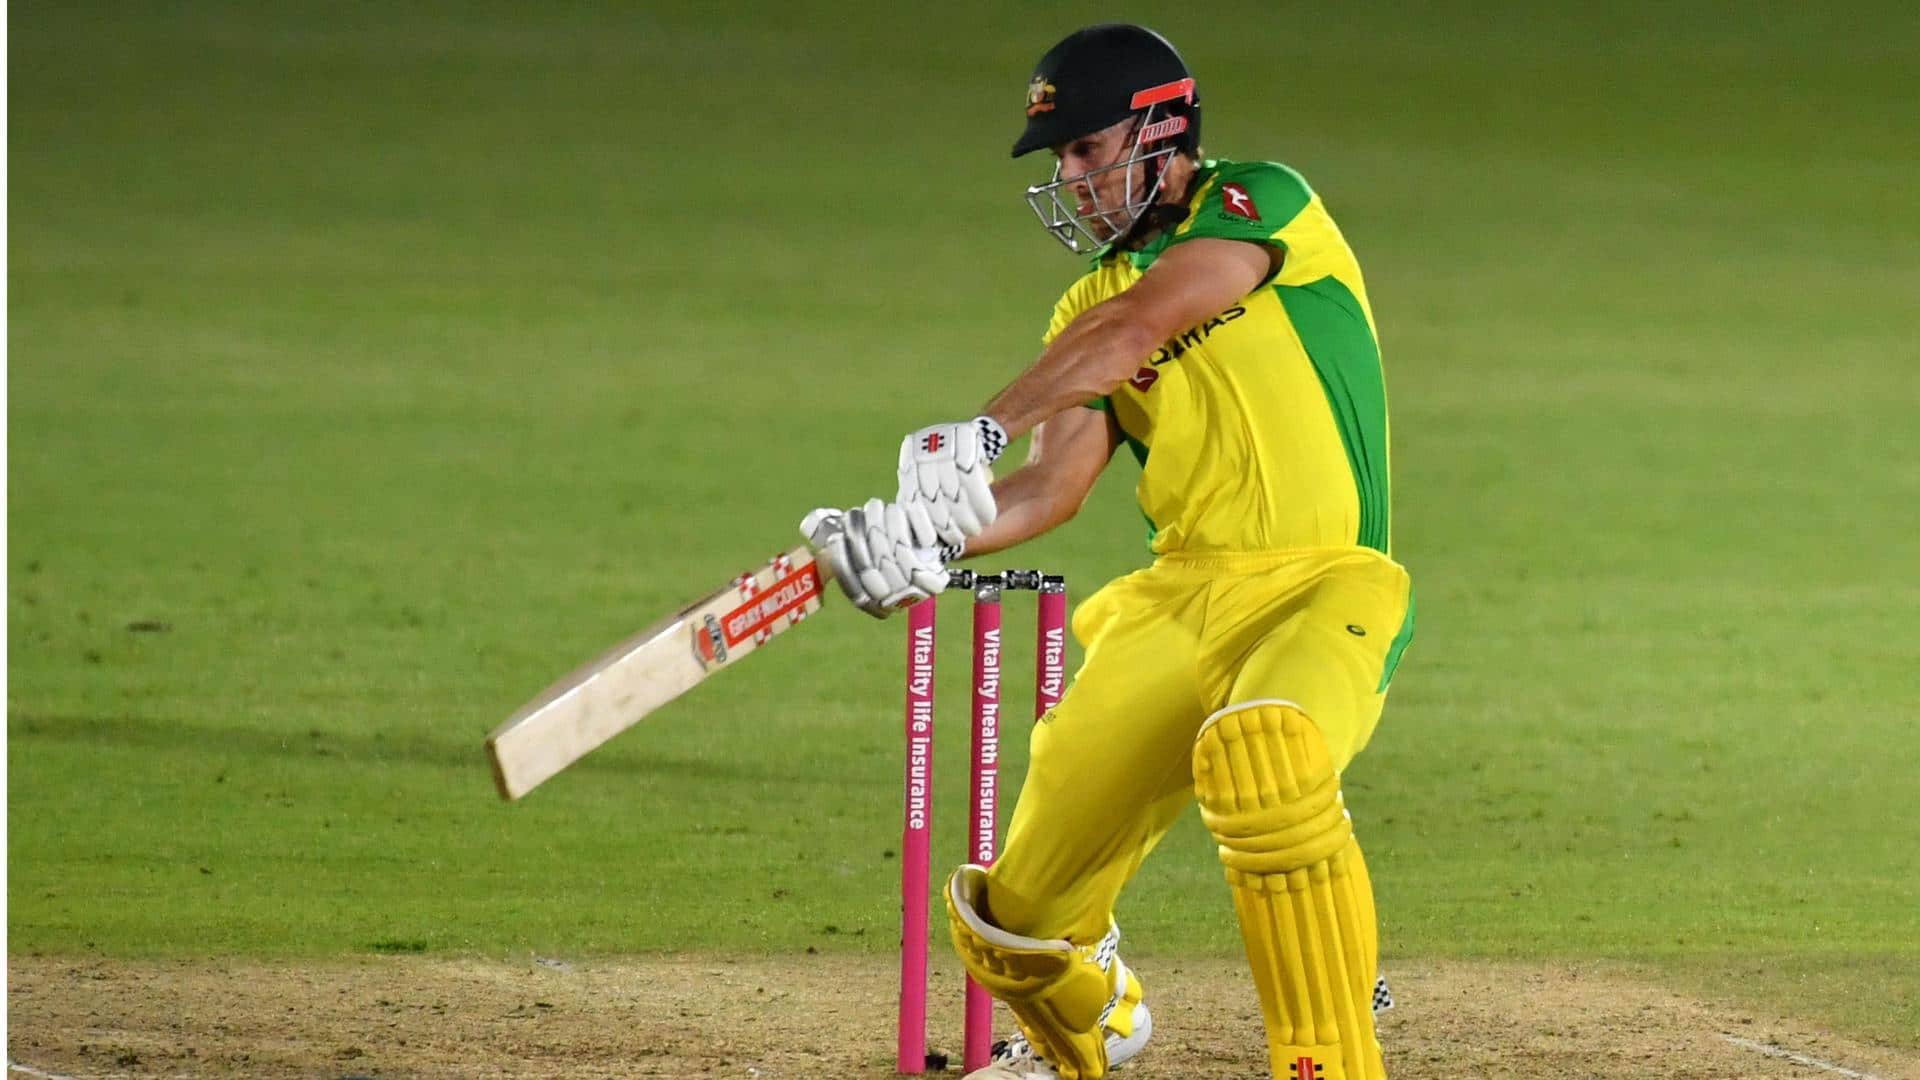 Mitchell Marsh named Australia's captain for SA T20Is: Decoding stats